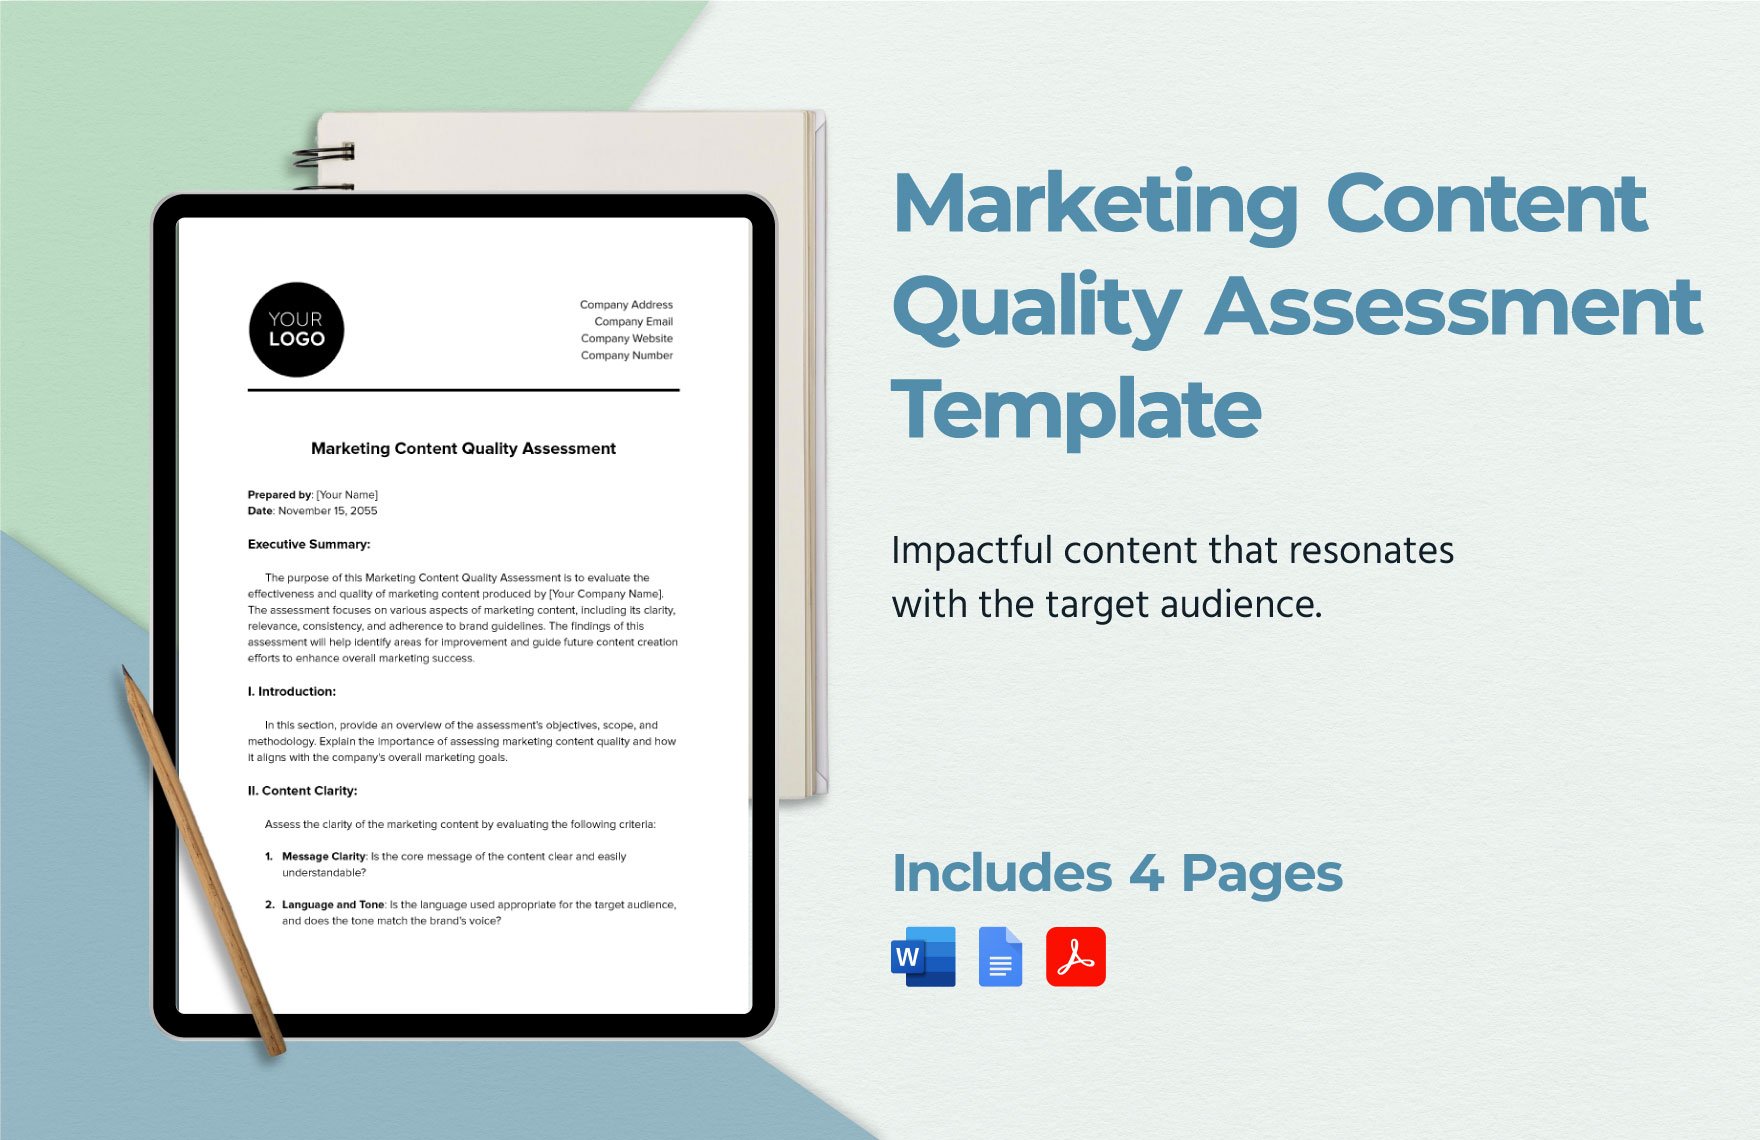 Marketing Content Quality Assessment Template